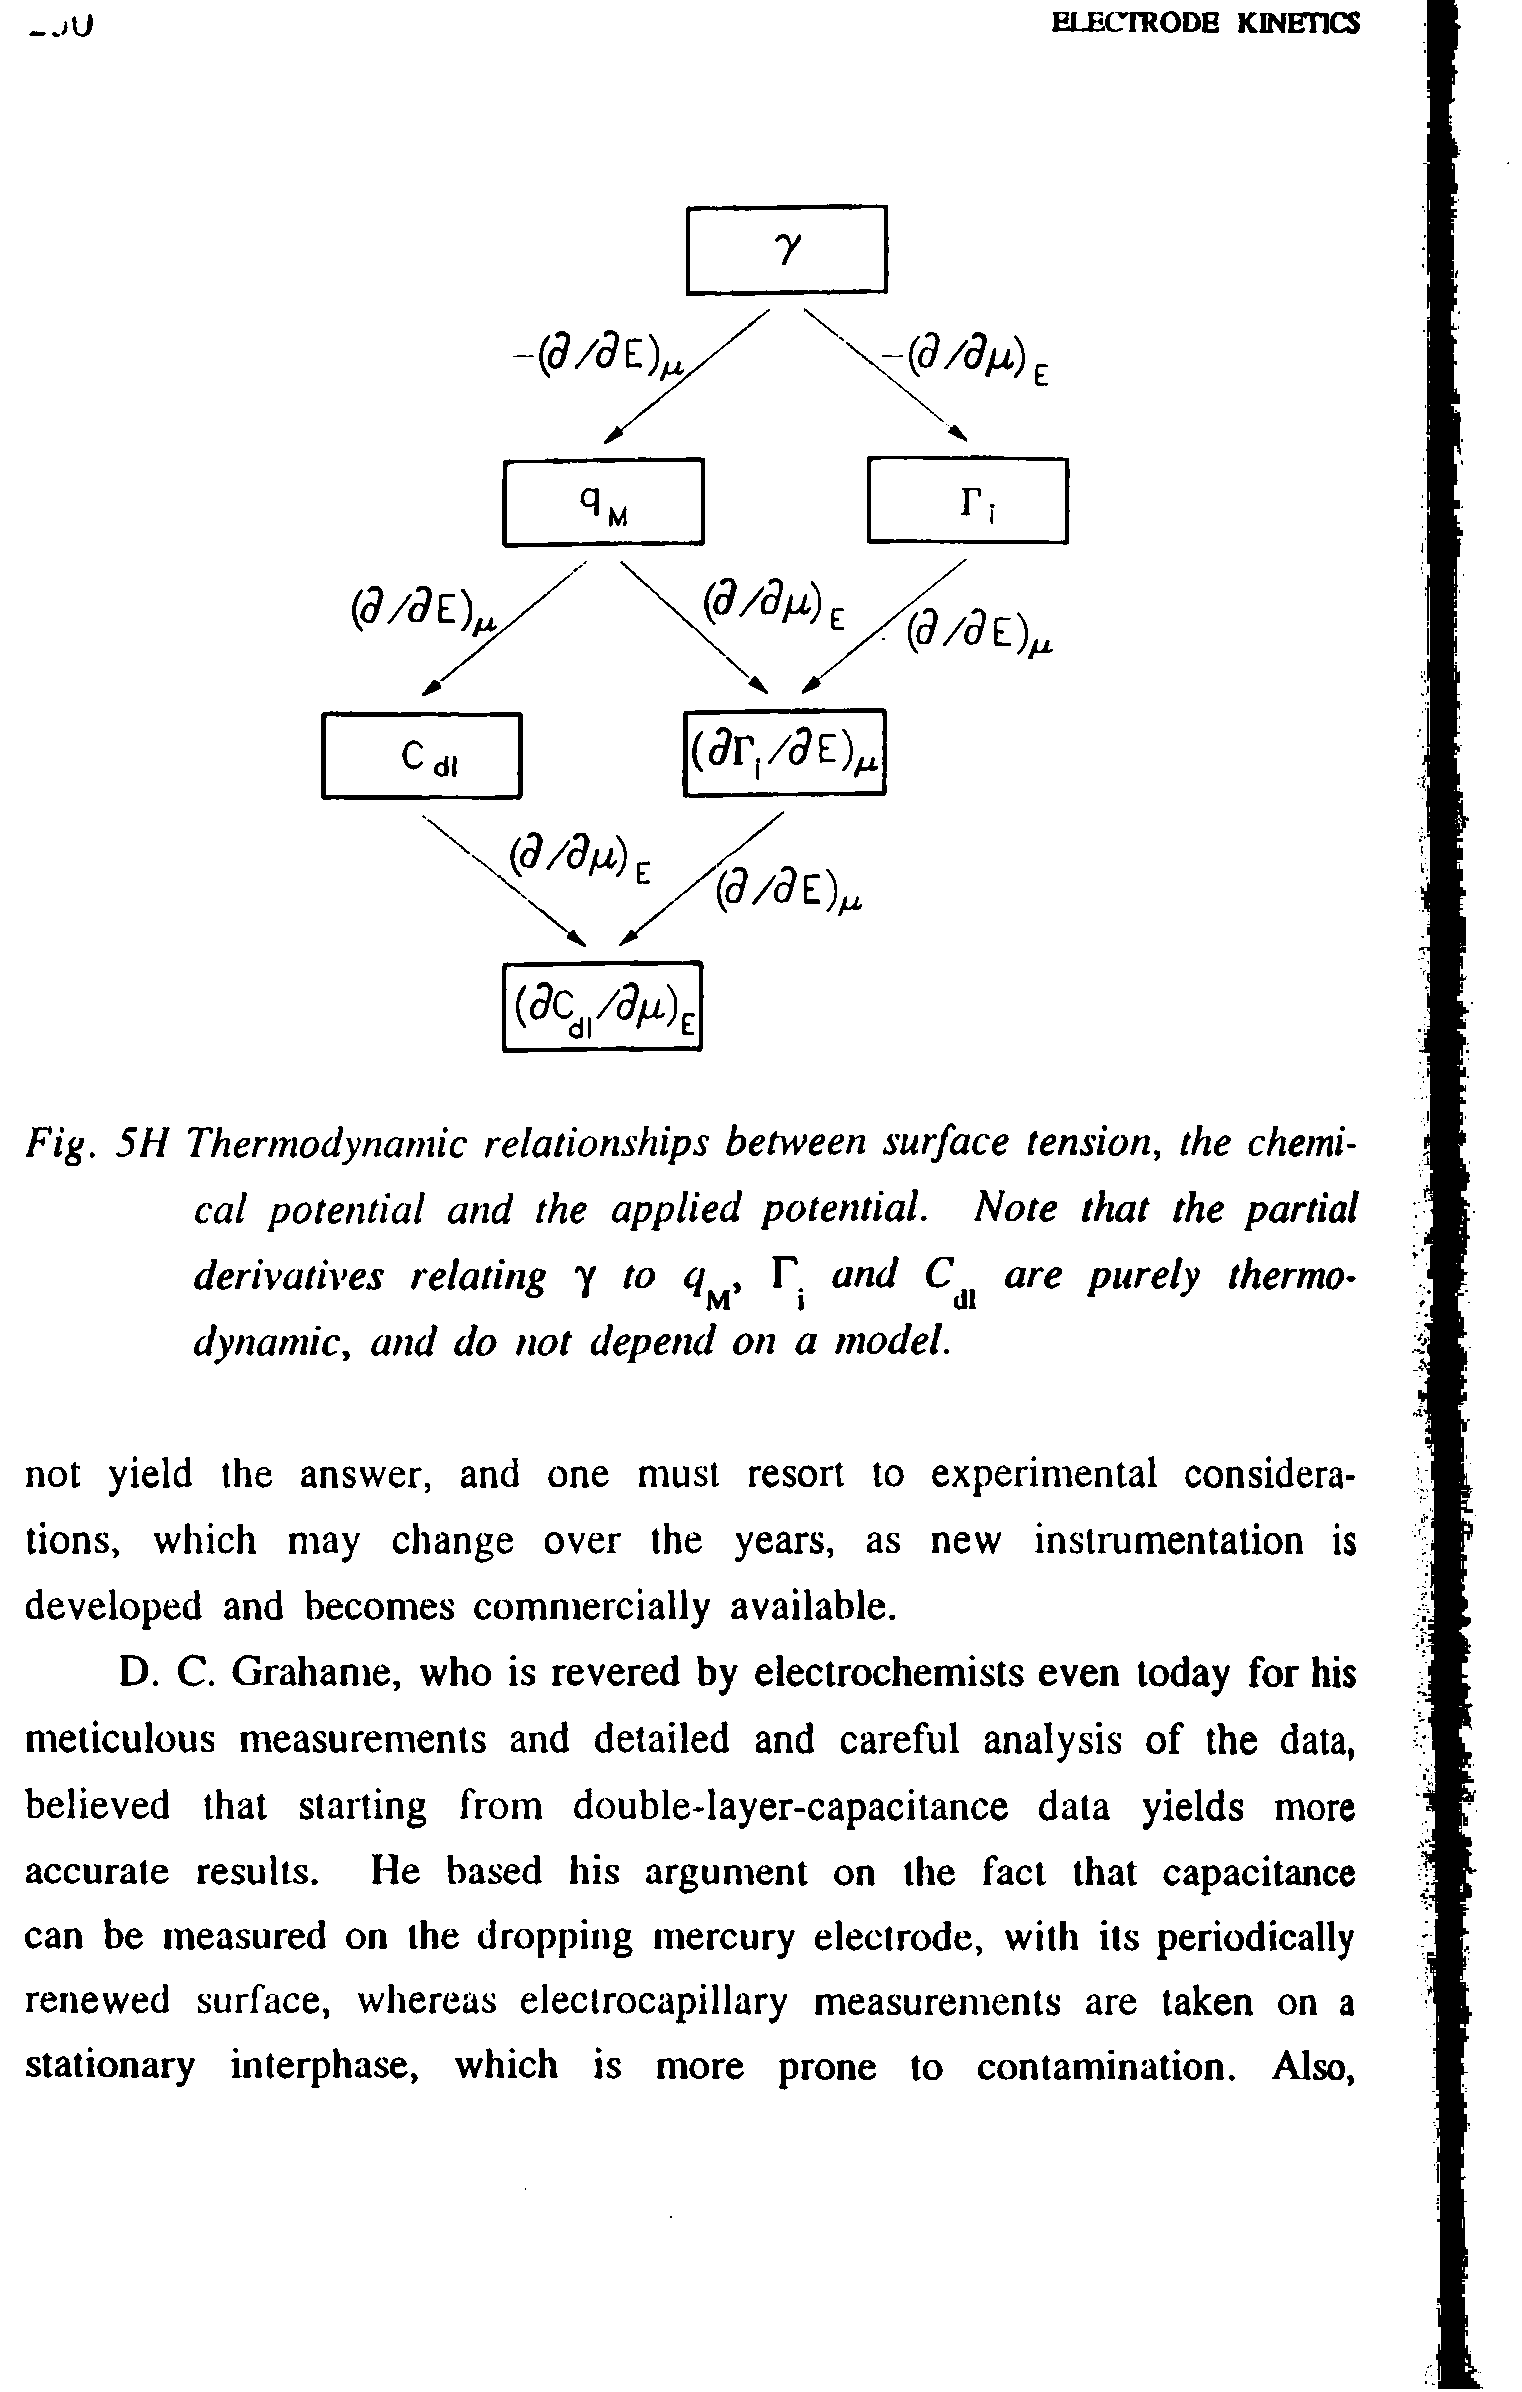 Fig. 5H Thermodynamic relationships between surface tension, the chemical potential and the applied potential. Note that the partial...